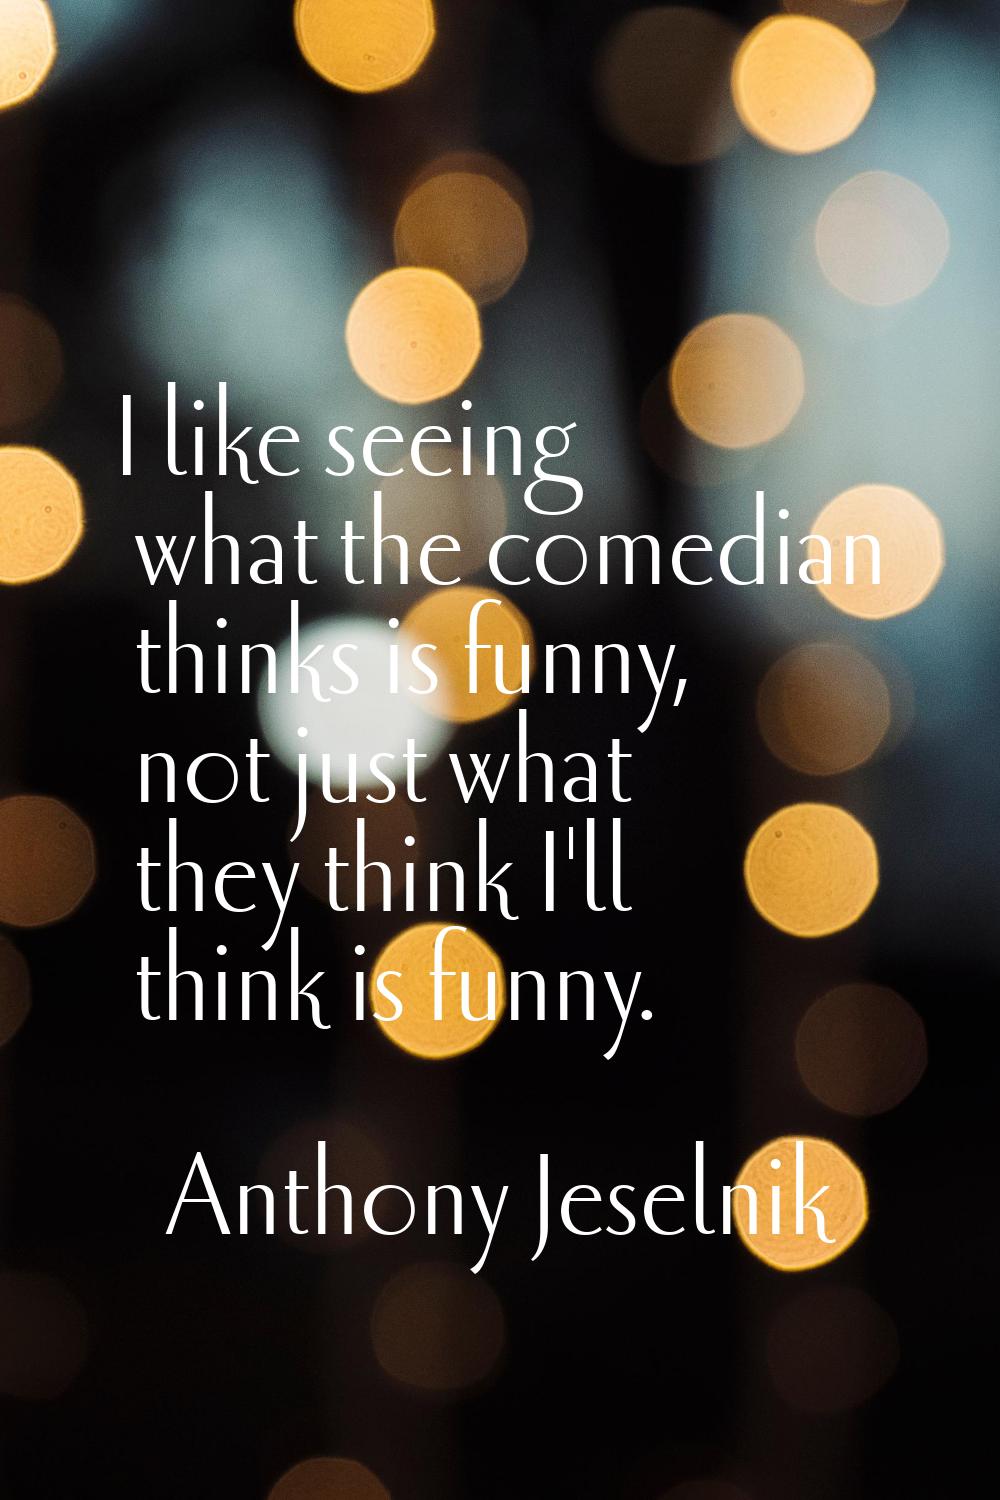 I like seeing what the comedian thinks is funny, not just what they think I'll think is funny.